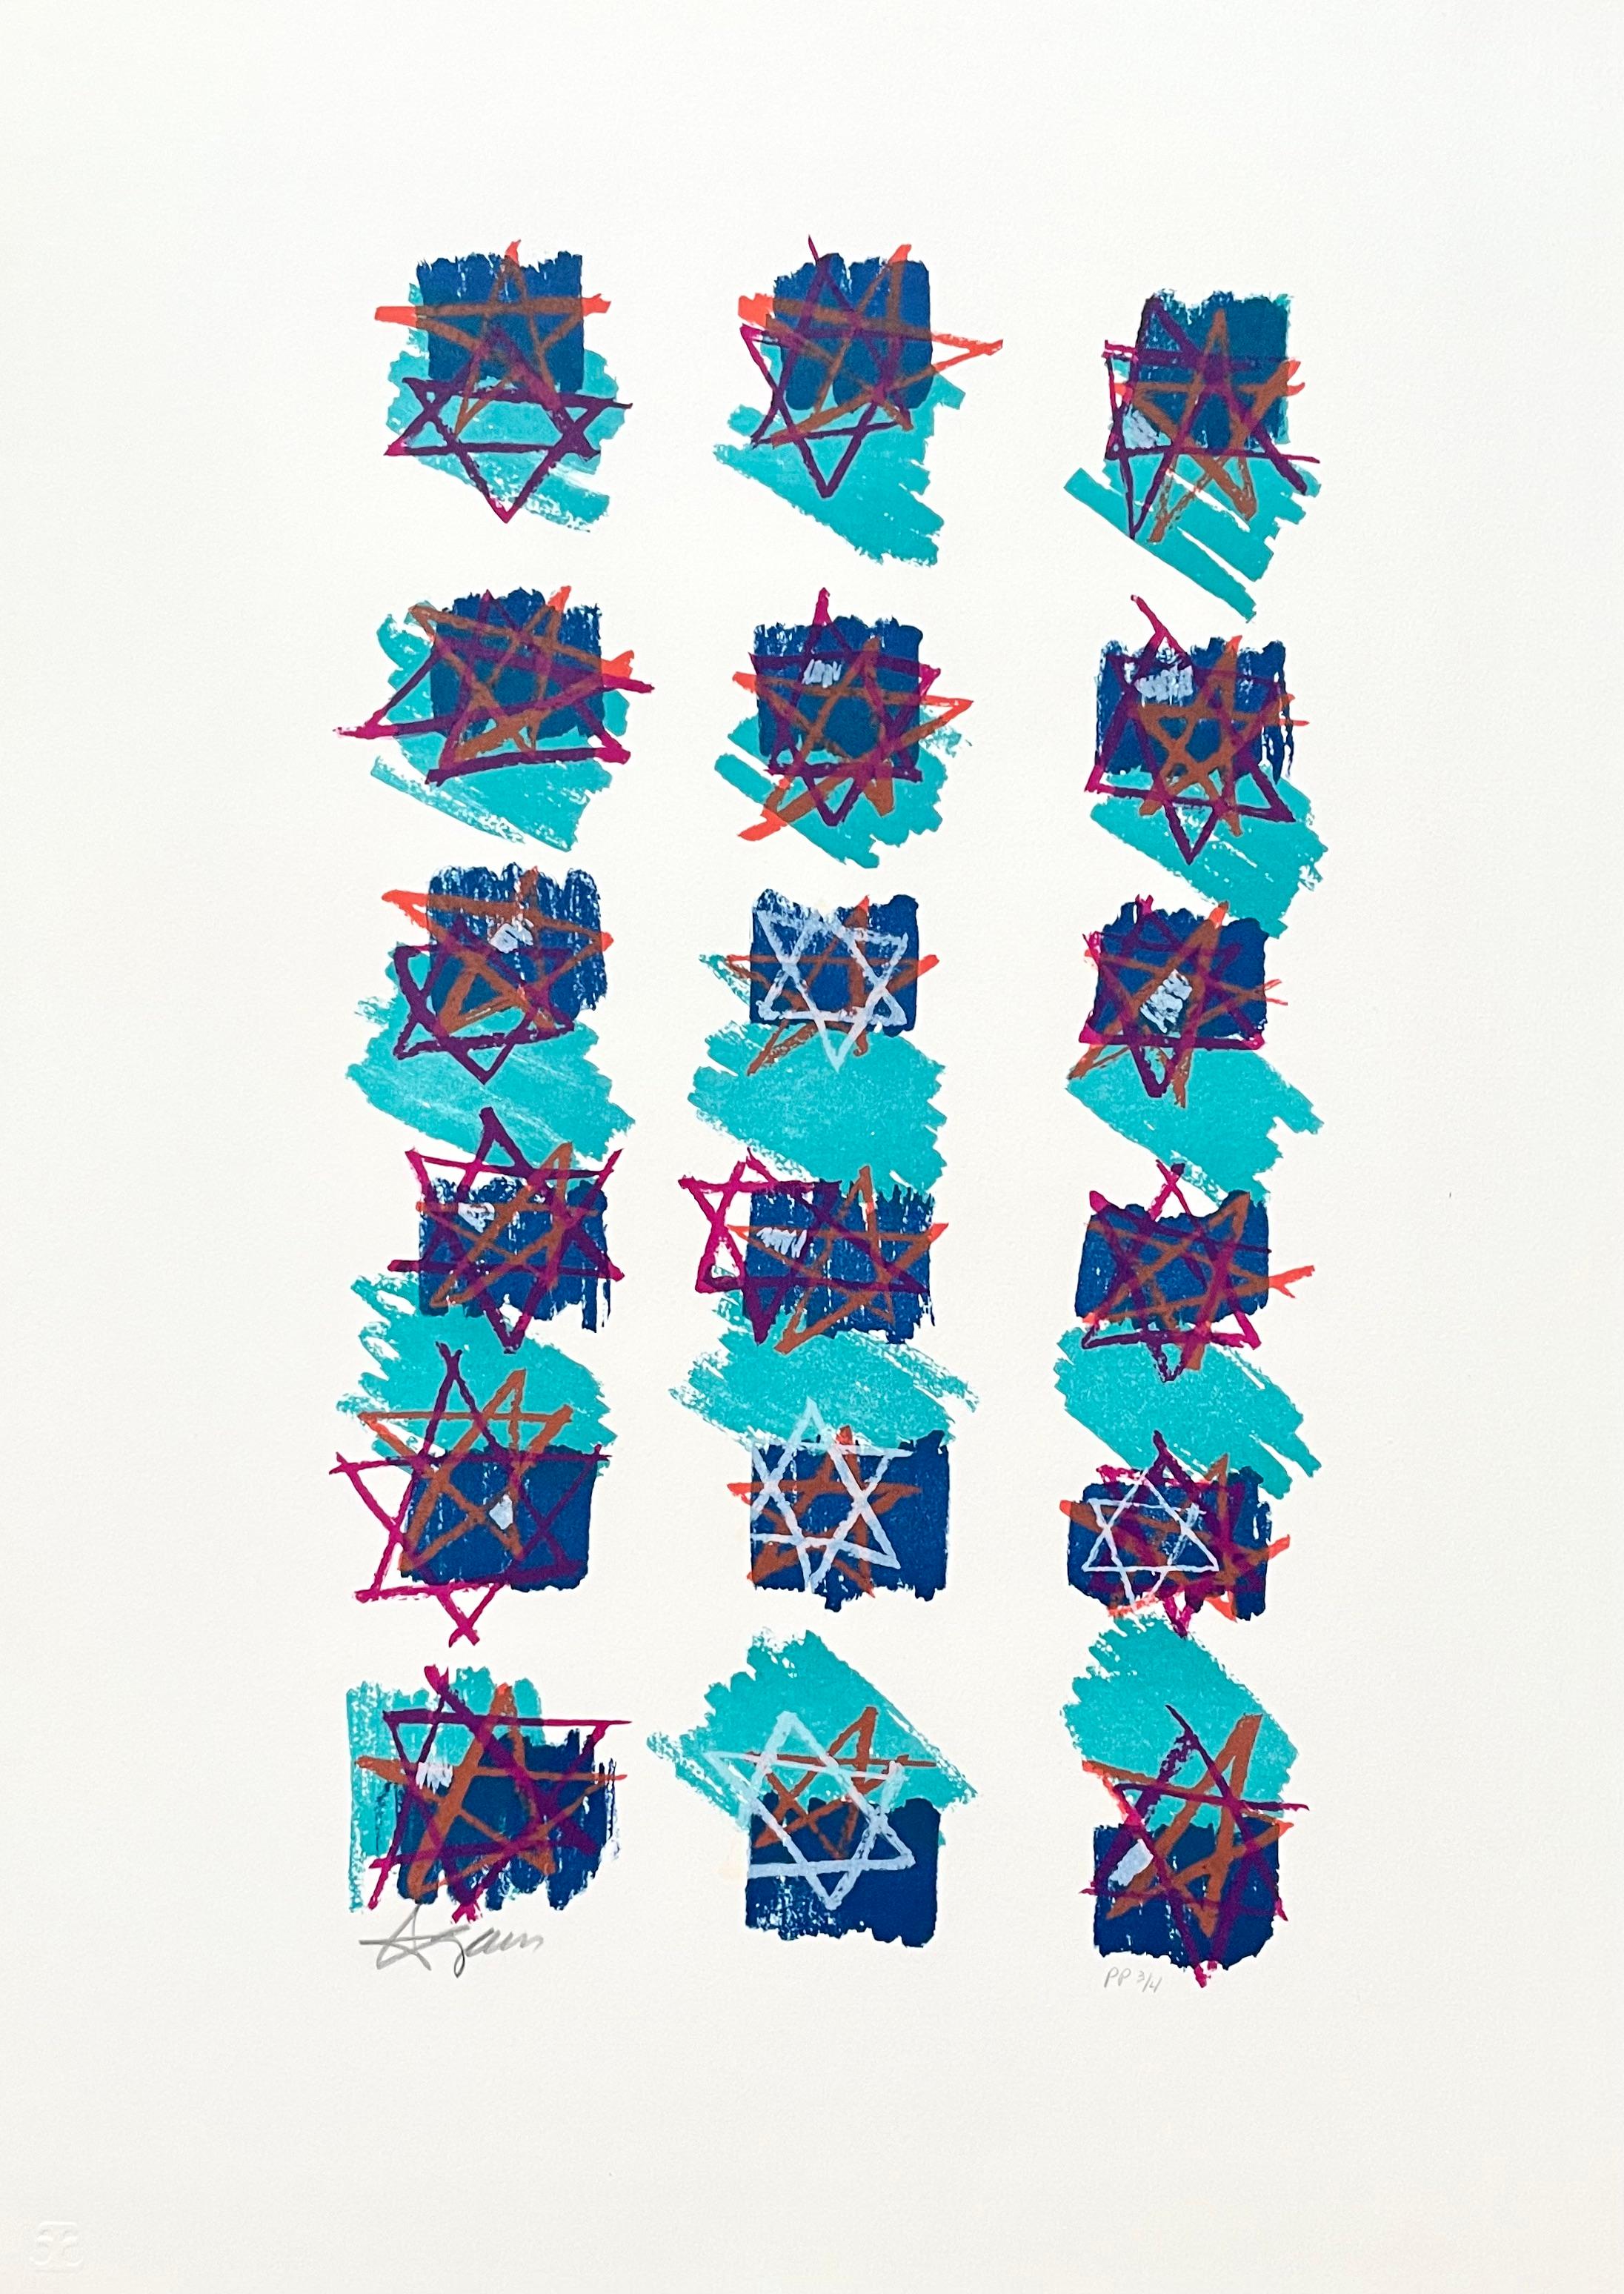 Artist: Yaakov Agam (1928)
Title: Stars
Year: 1989
Medium: Silkscreen on Arches paper
Edition: P.P. 3/14, 180, plus proofs
Size: 26.5 x 19 inches
Condition: Good
Inscription: Signed and numbered by the artist

YAACOV AGAM (1928-  ) Yaacov Agam is